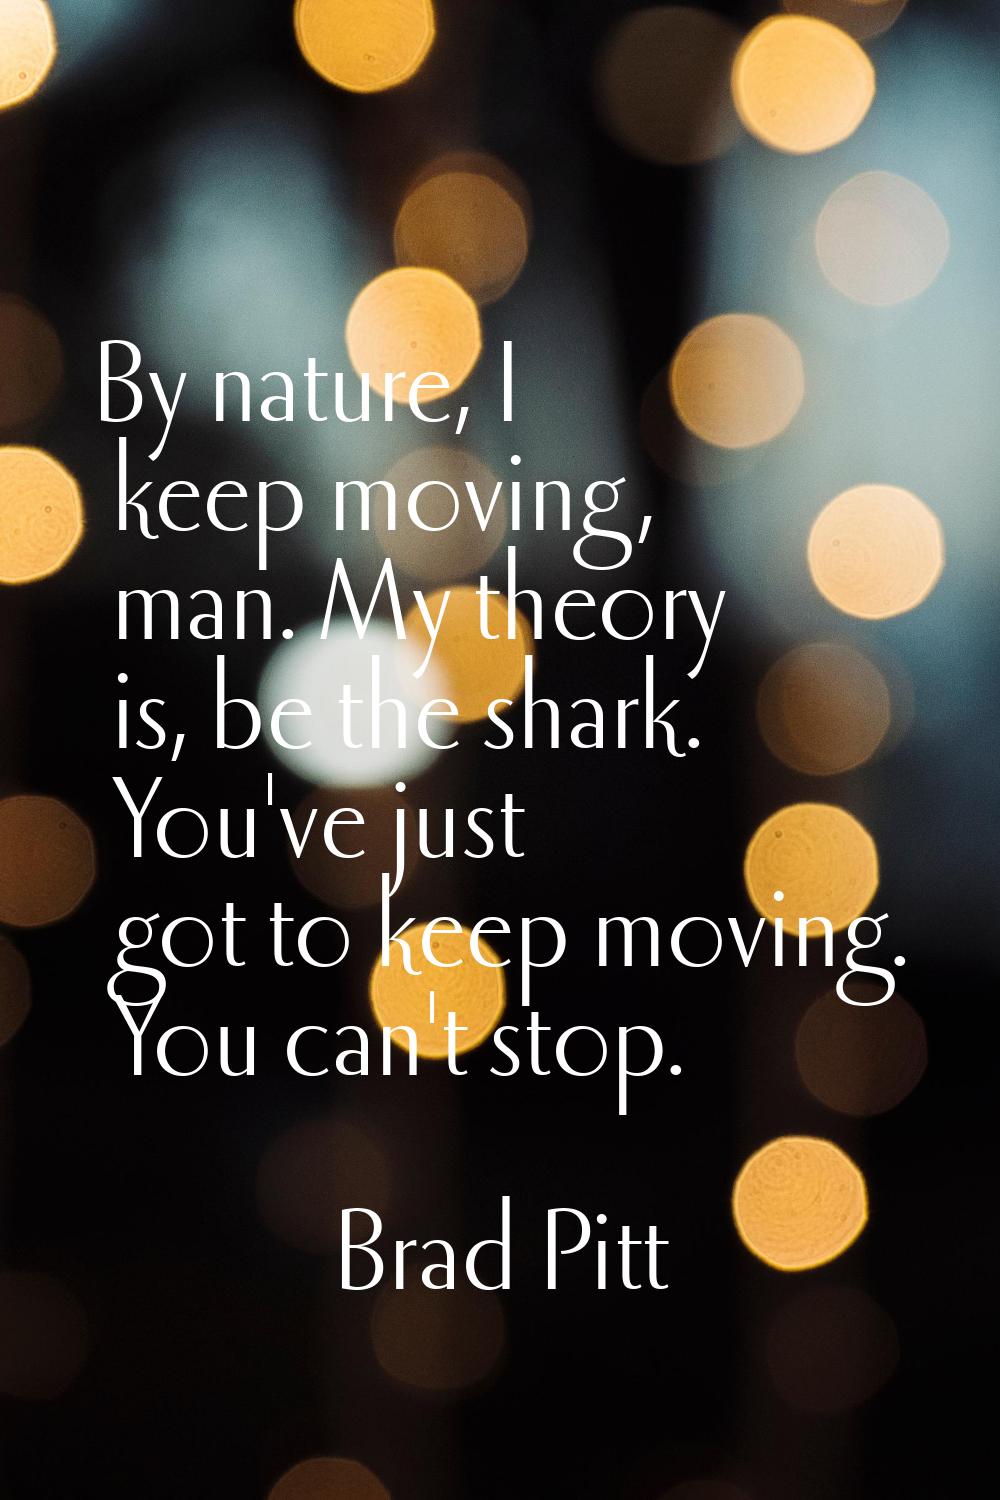 By nature, I keep moving, man. My theory is, be the shark. You've just got to keep moving. You can'